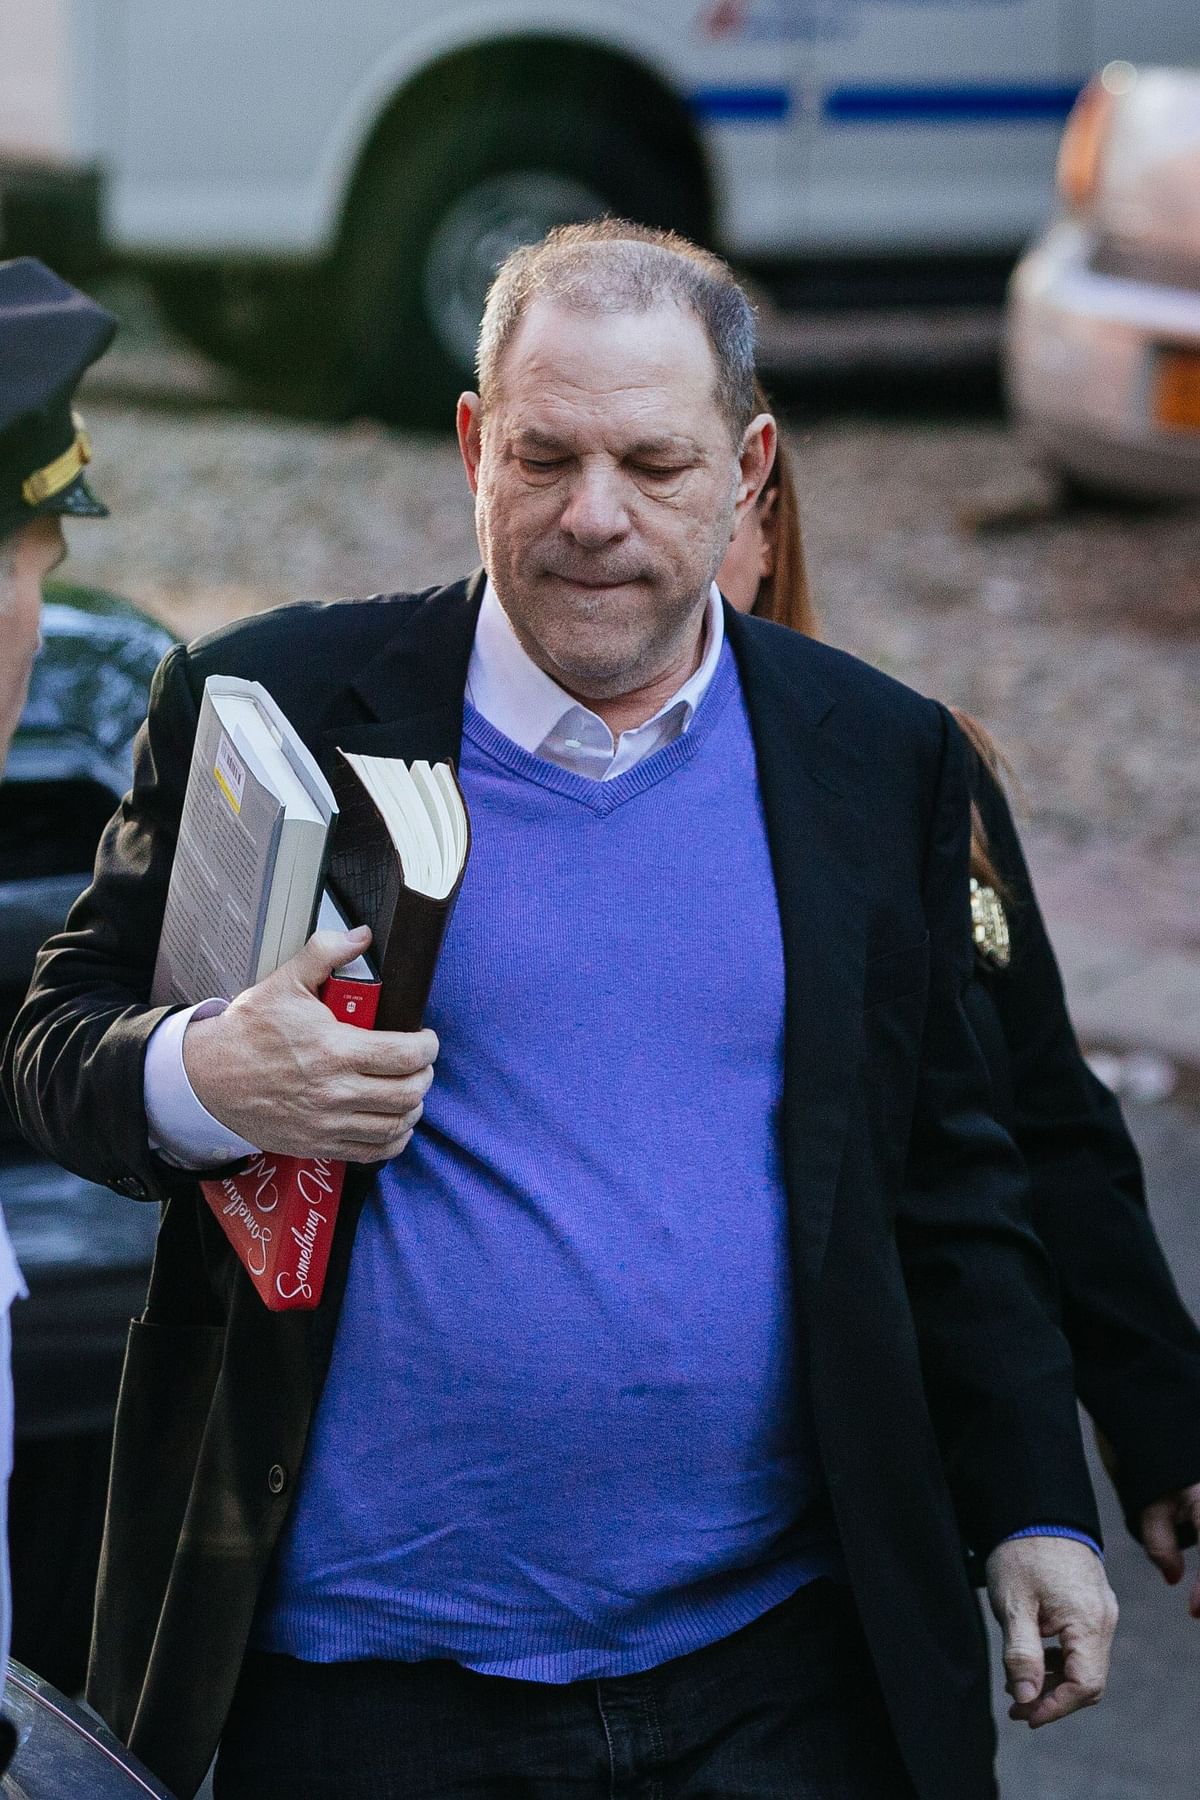 Metrolife: Weinstein is finally exposed. But what's the scene here?